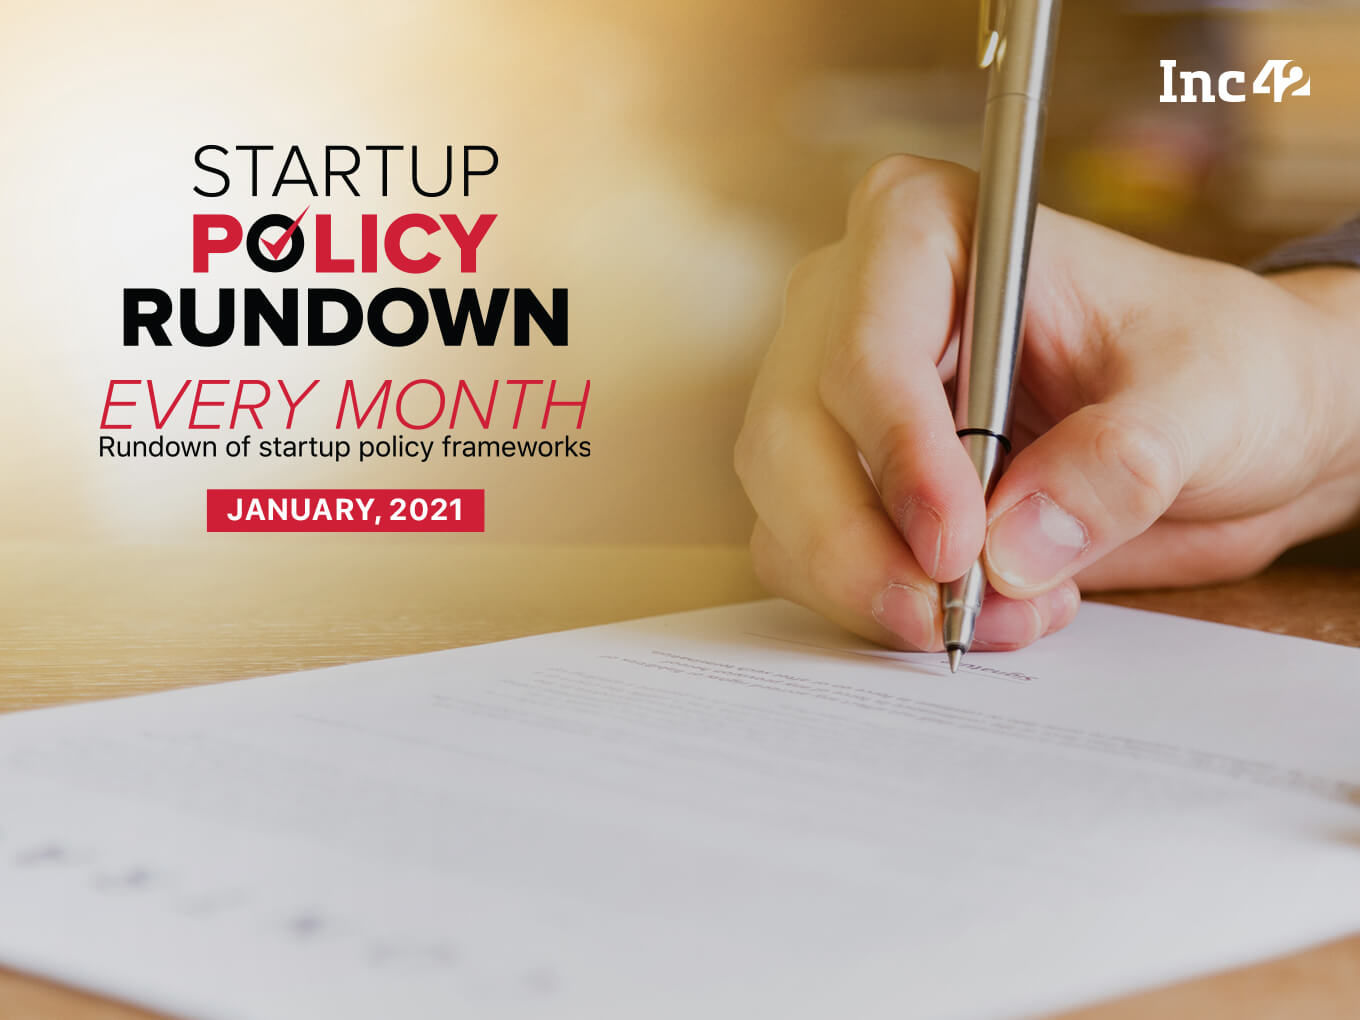 Startup Policy Rundown: Union Budget 2021, Startup India Seed Fund & More